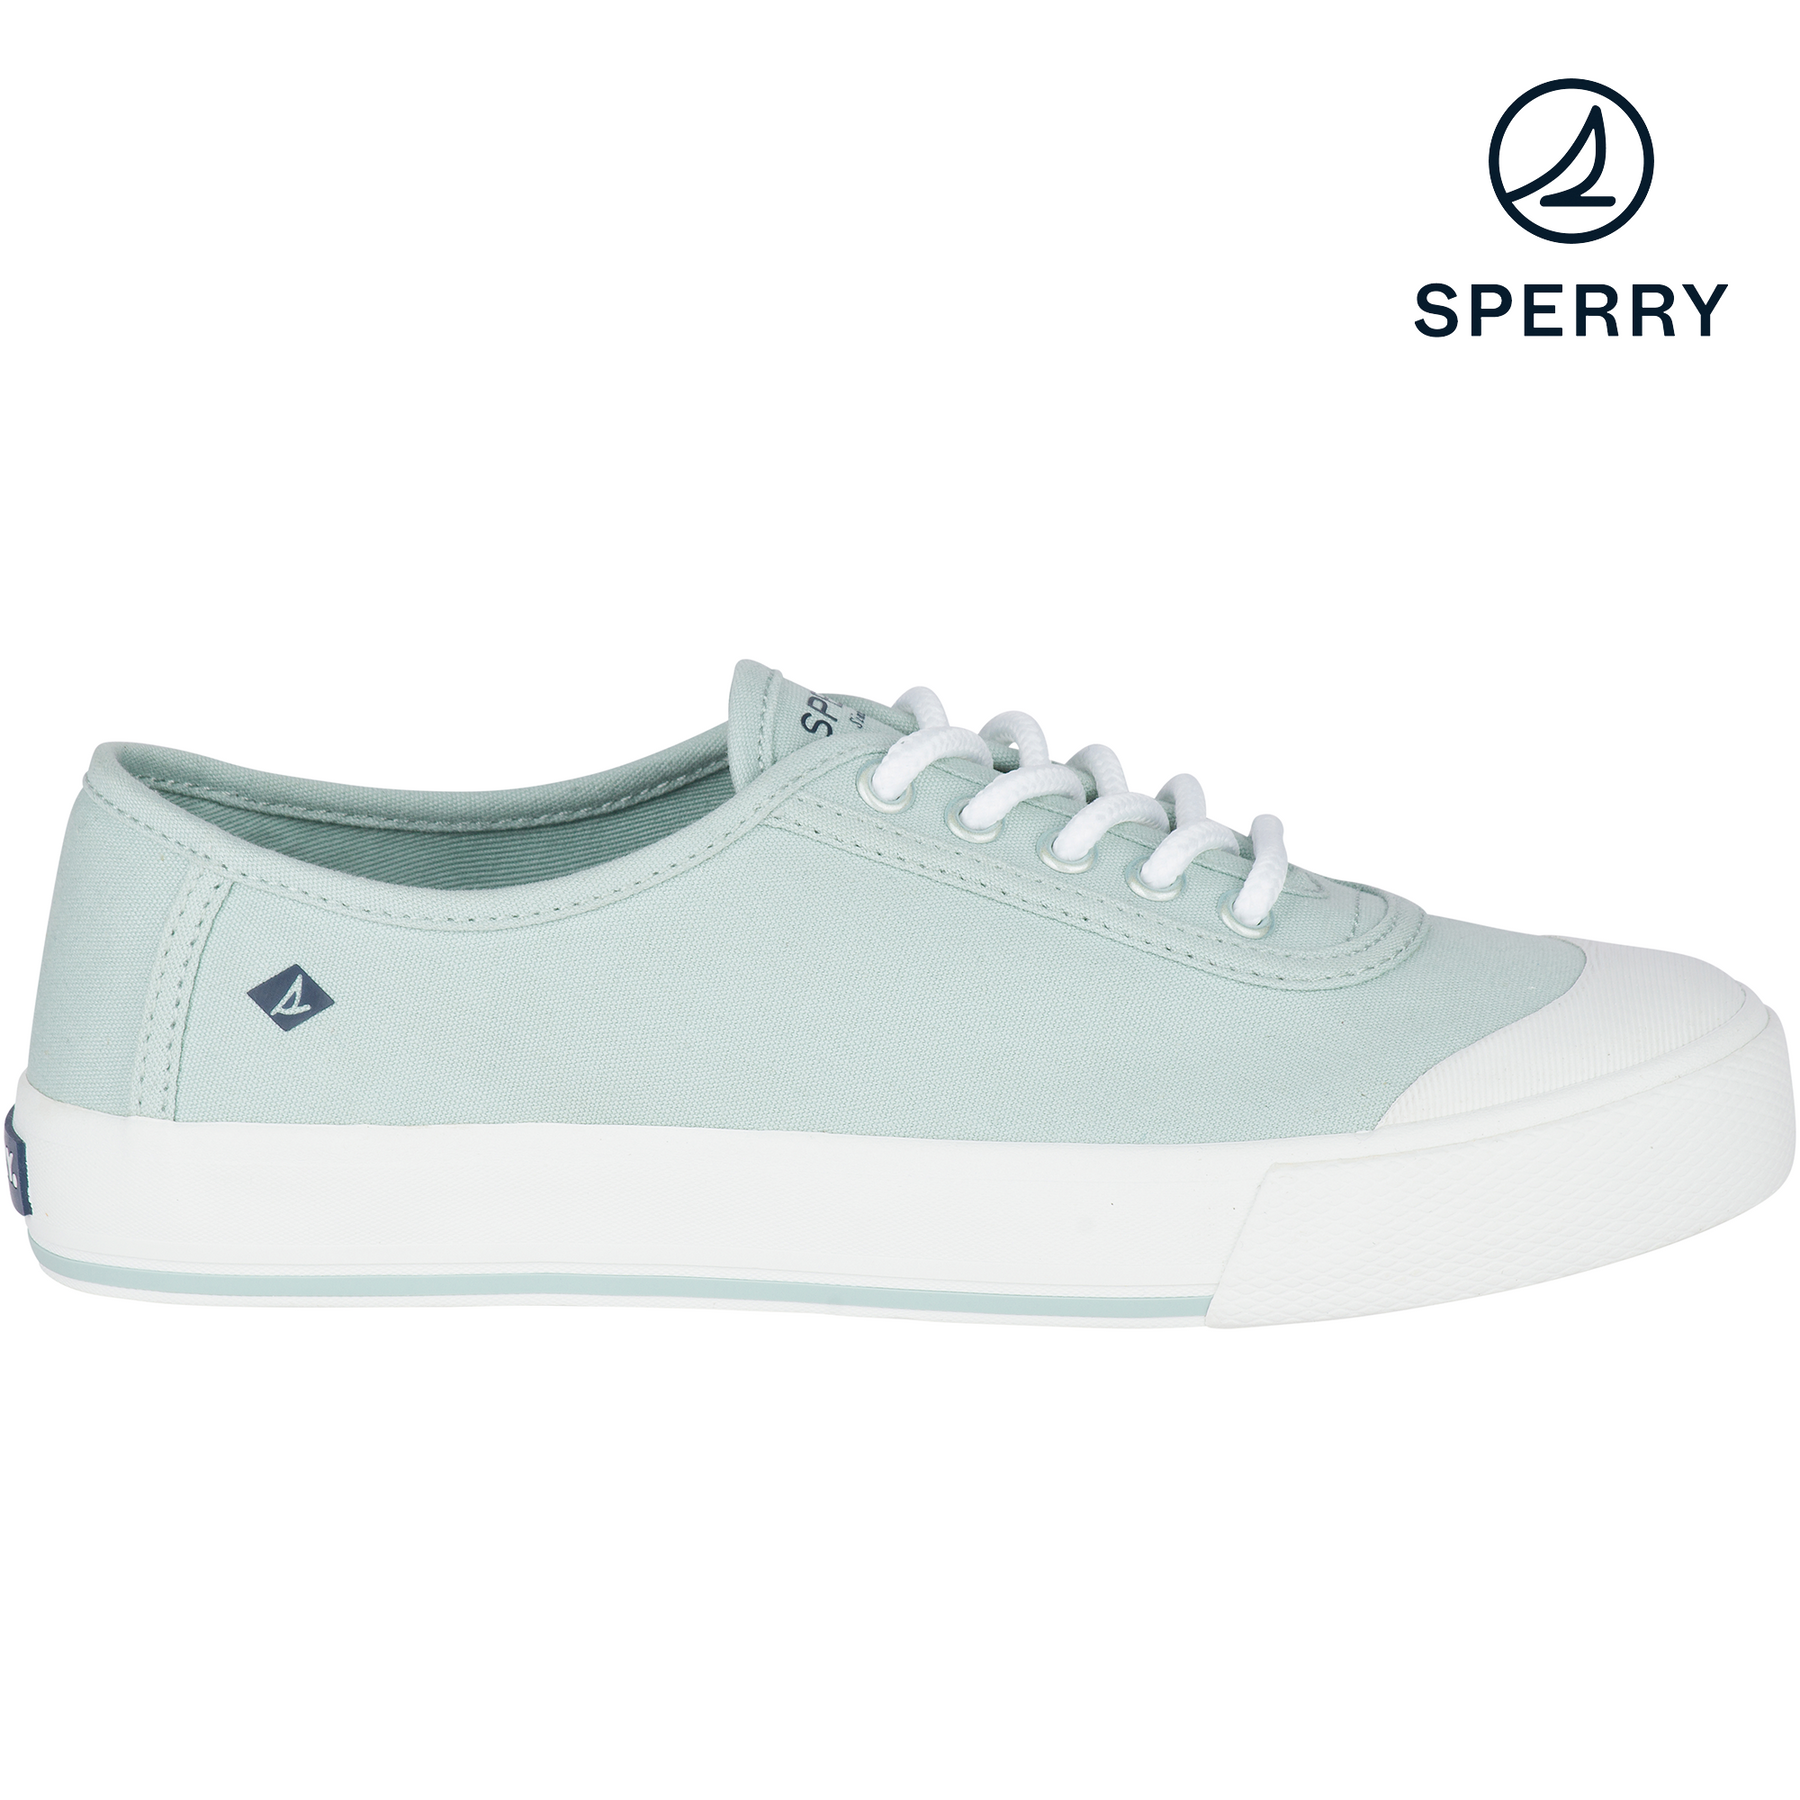 Women's Crest Edge Saturated Mint Sneakers (STS82871)